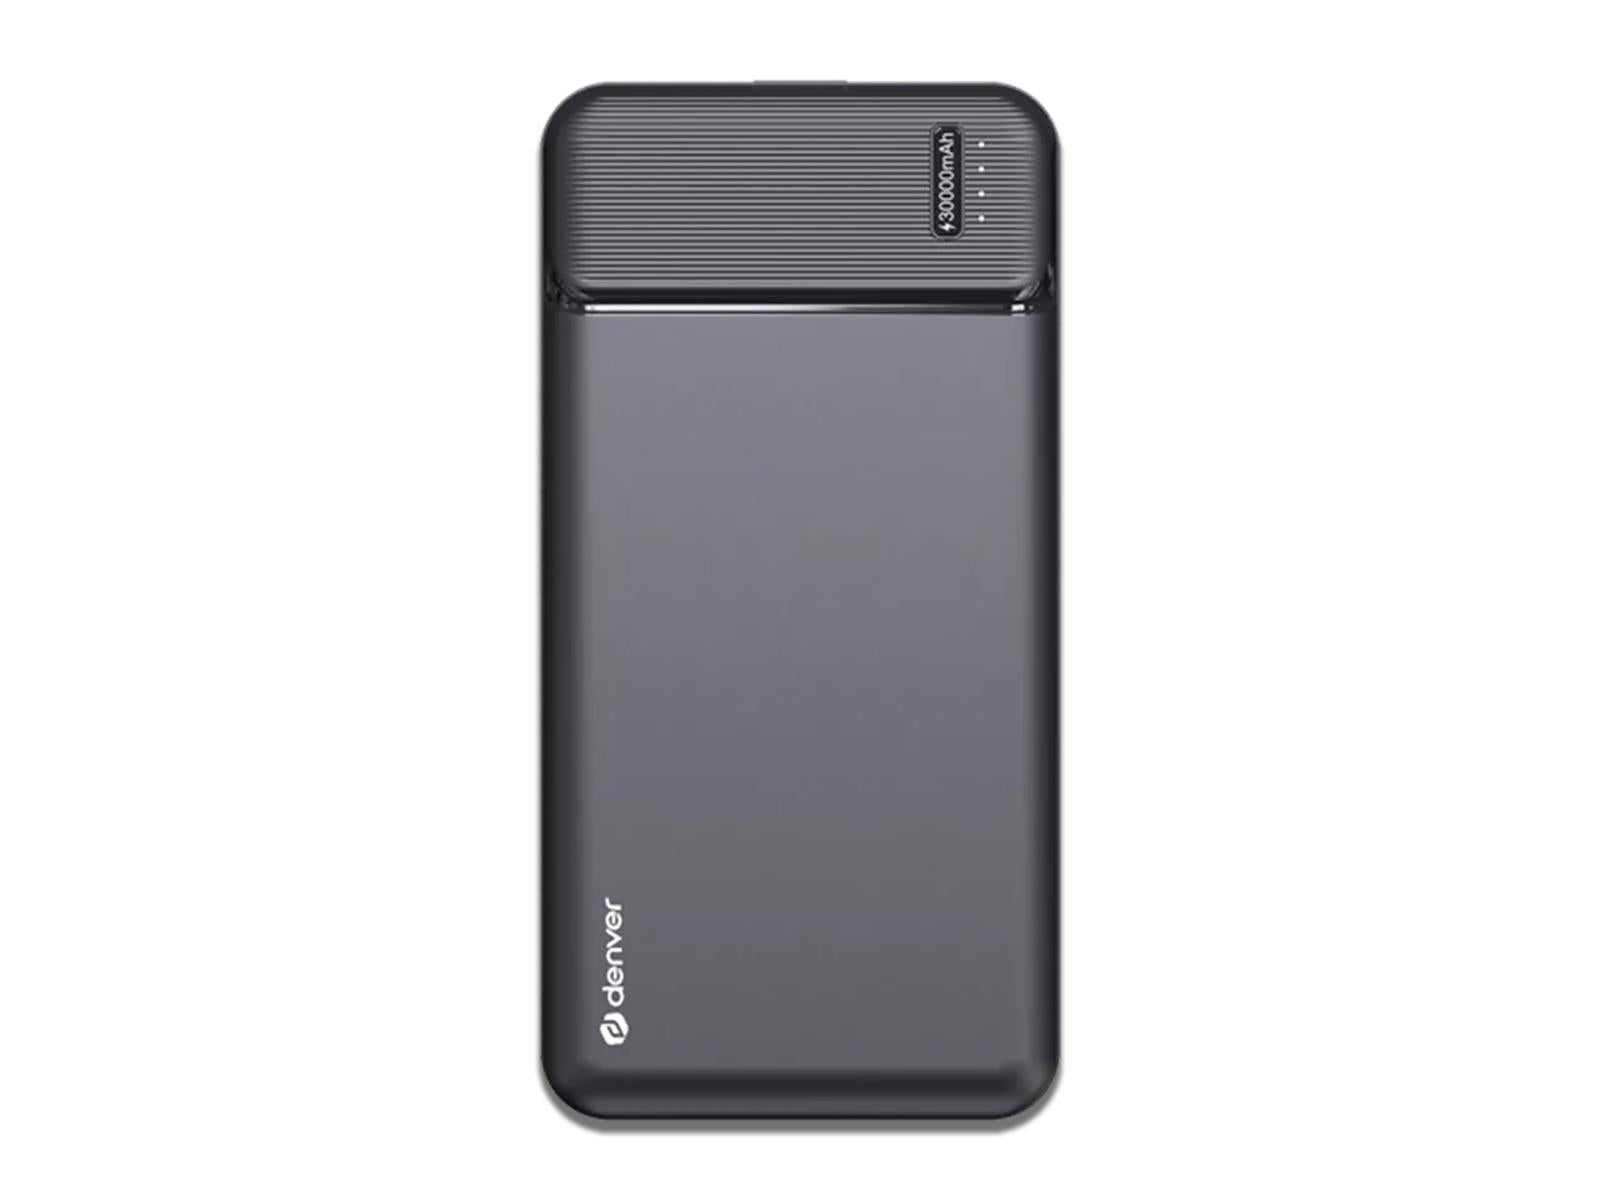 Image shows an overhead view of the 30,000mAh Denver High Capacity Portable Charger